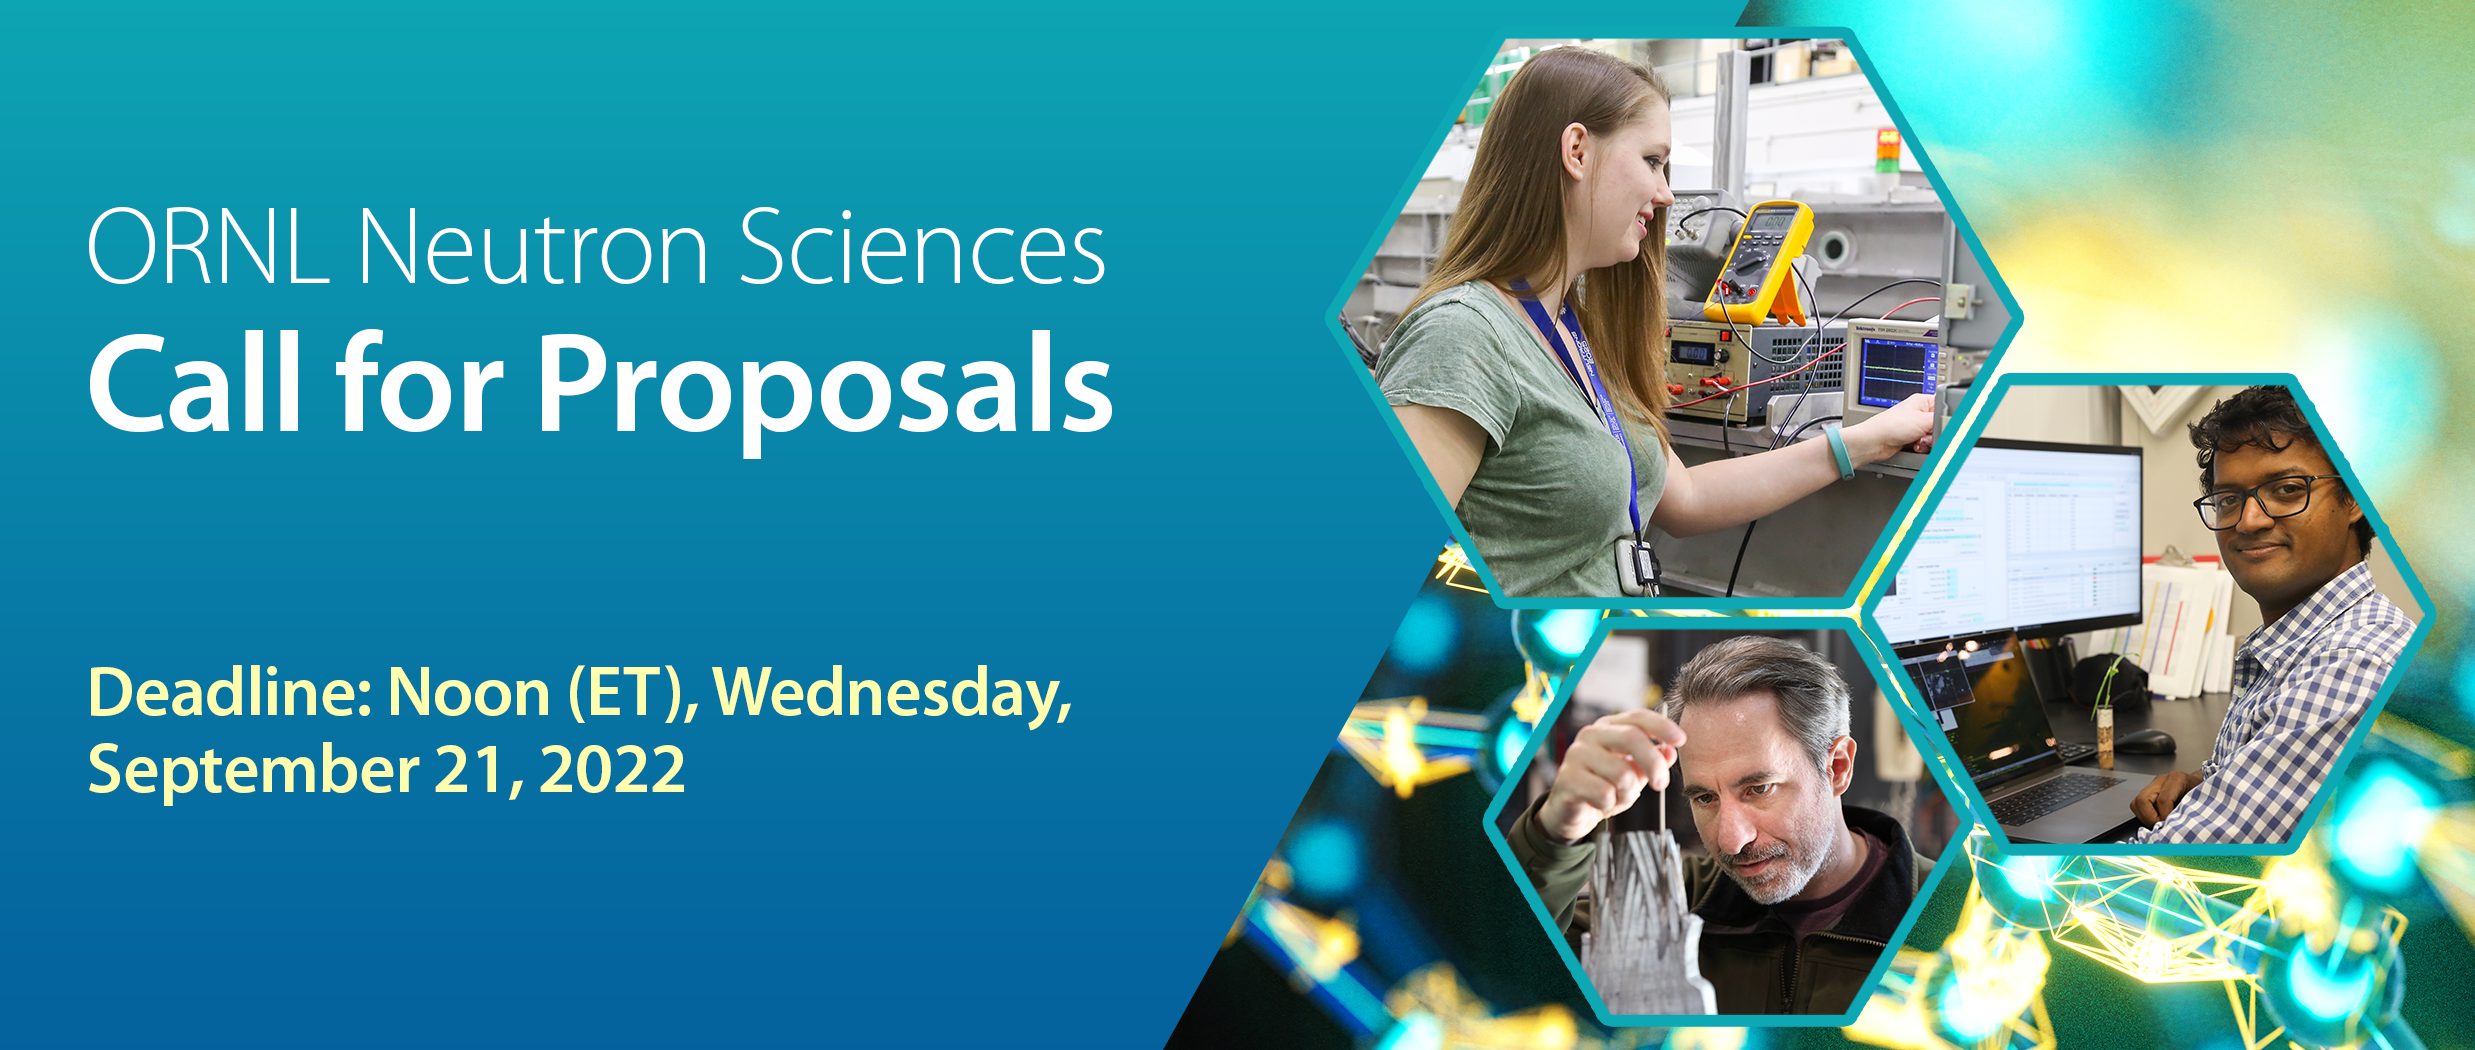 ORNL Neutron Sciences Call for Proposals Deadline Noon (Eastern), Wednesday, September 21, 2022